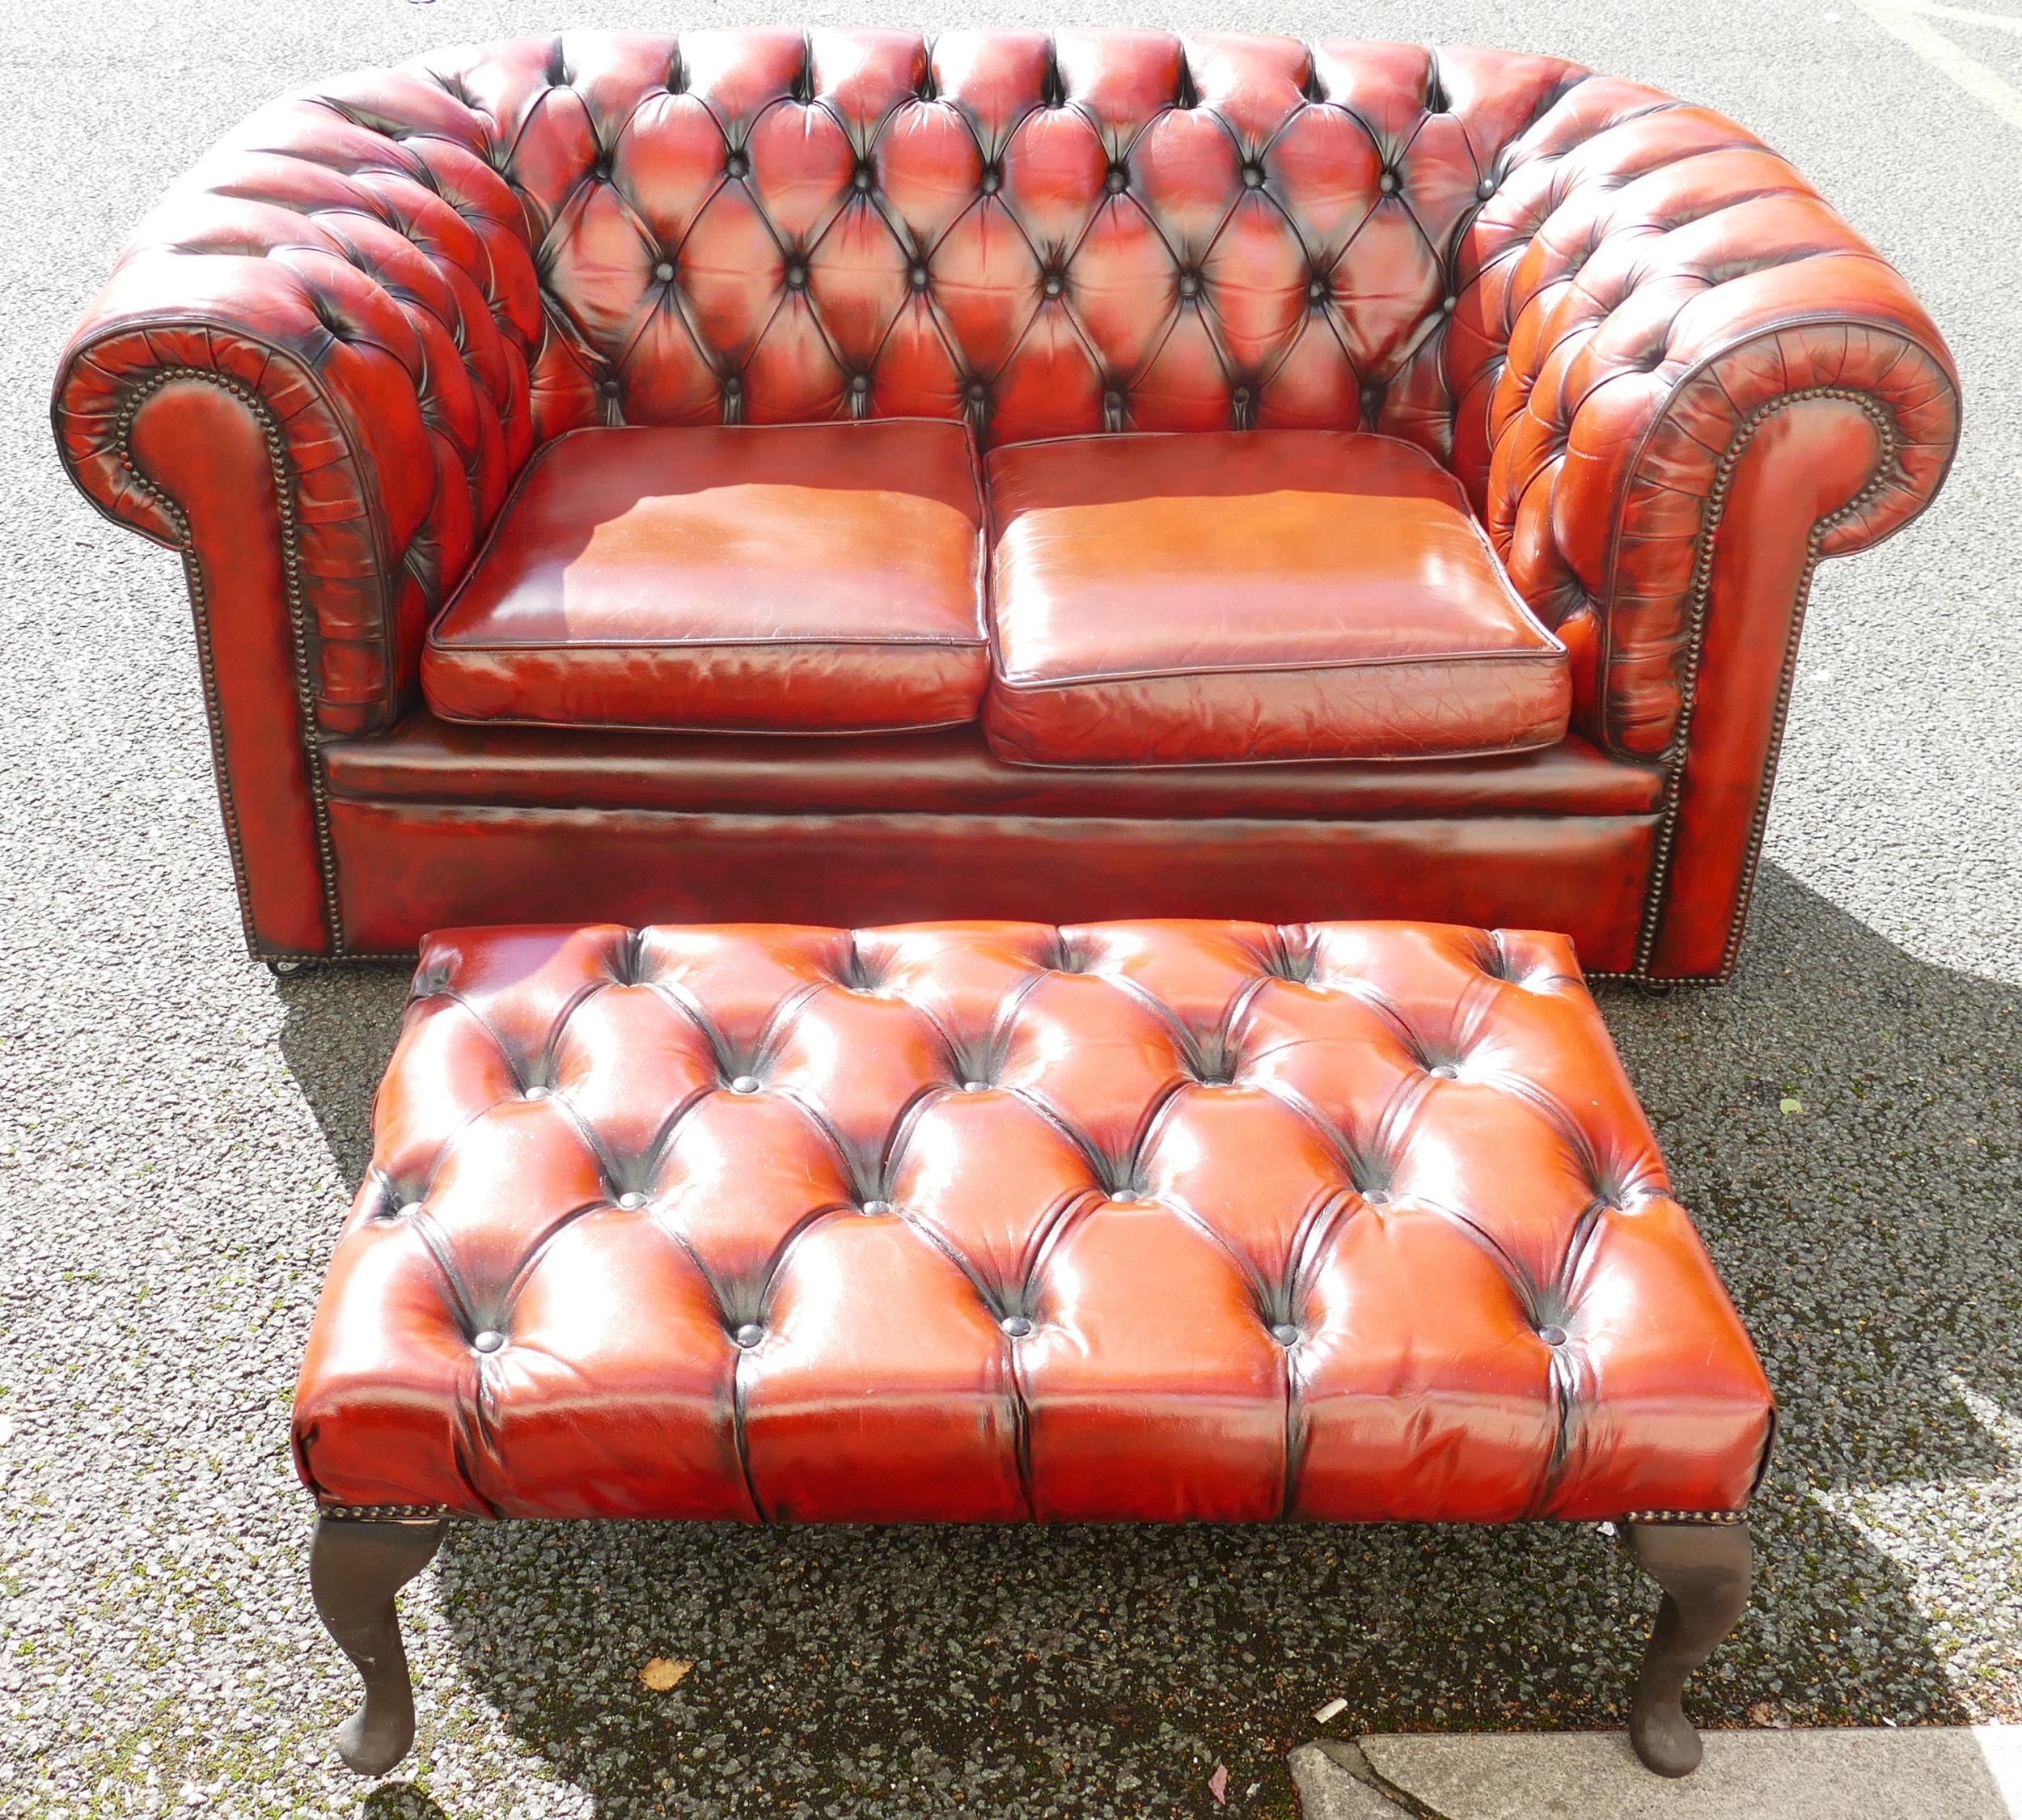 Two Seat Leather Settee & stool